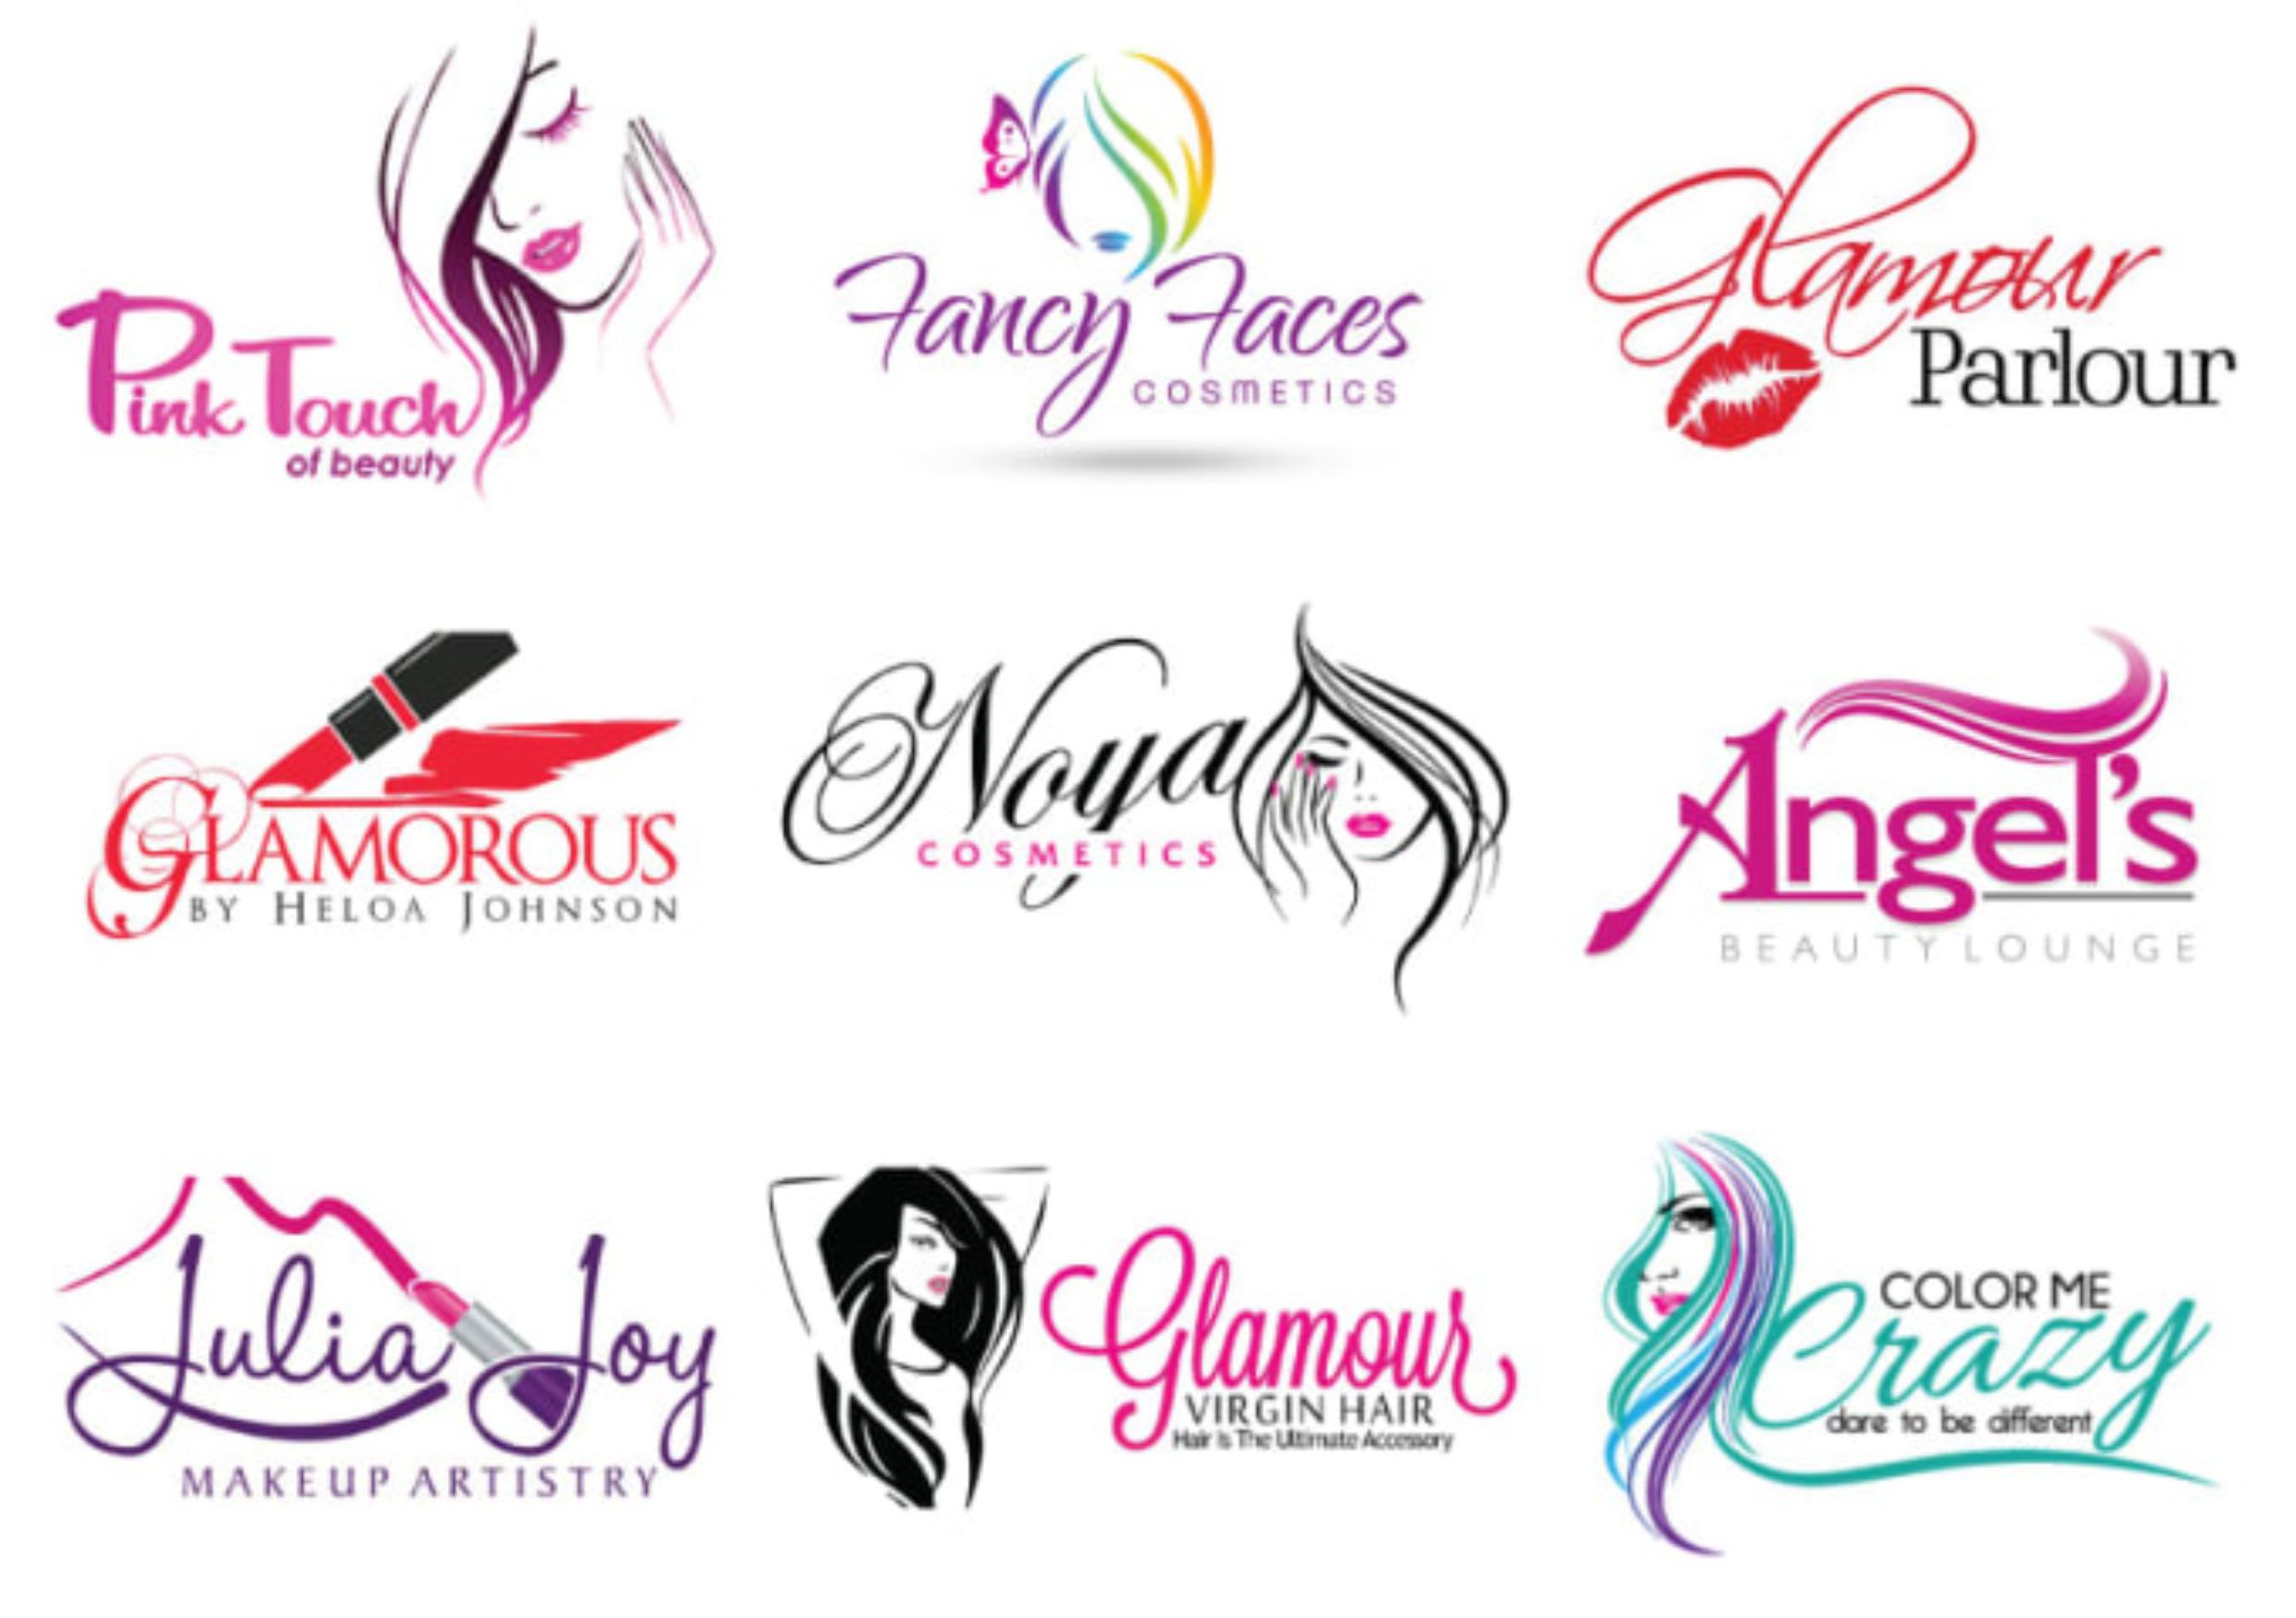 Do hair brand beauty fashion spa logo by Sufigraphics11 | Fiverr